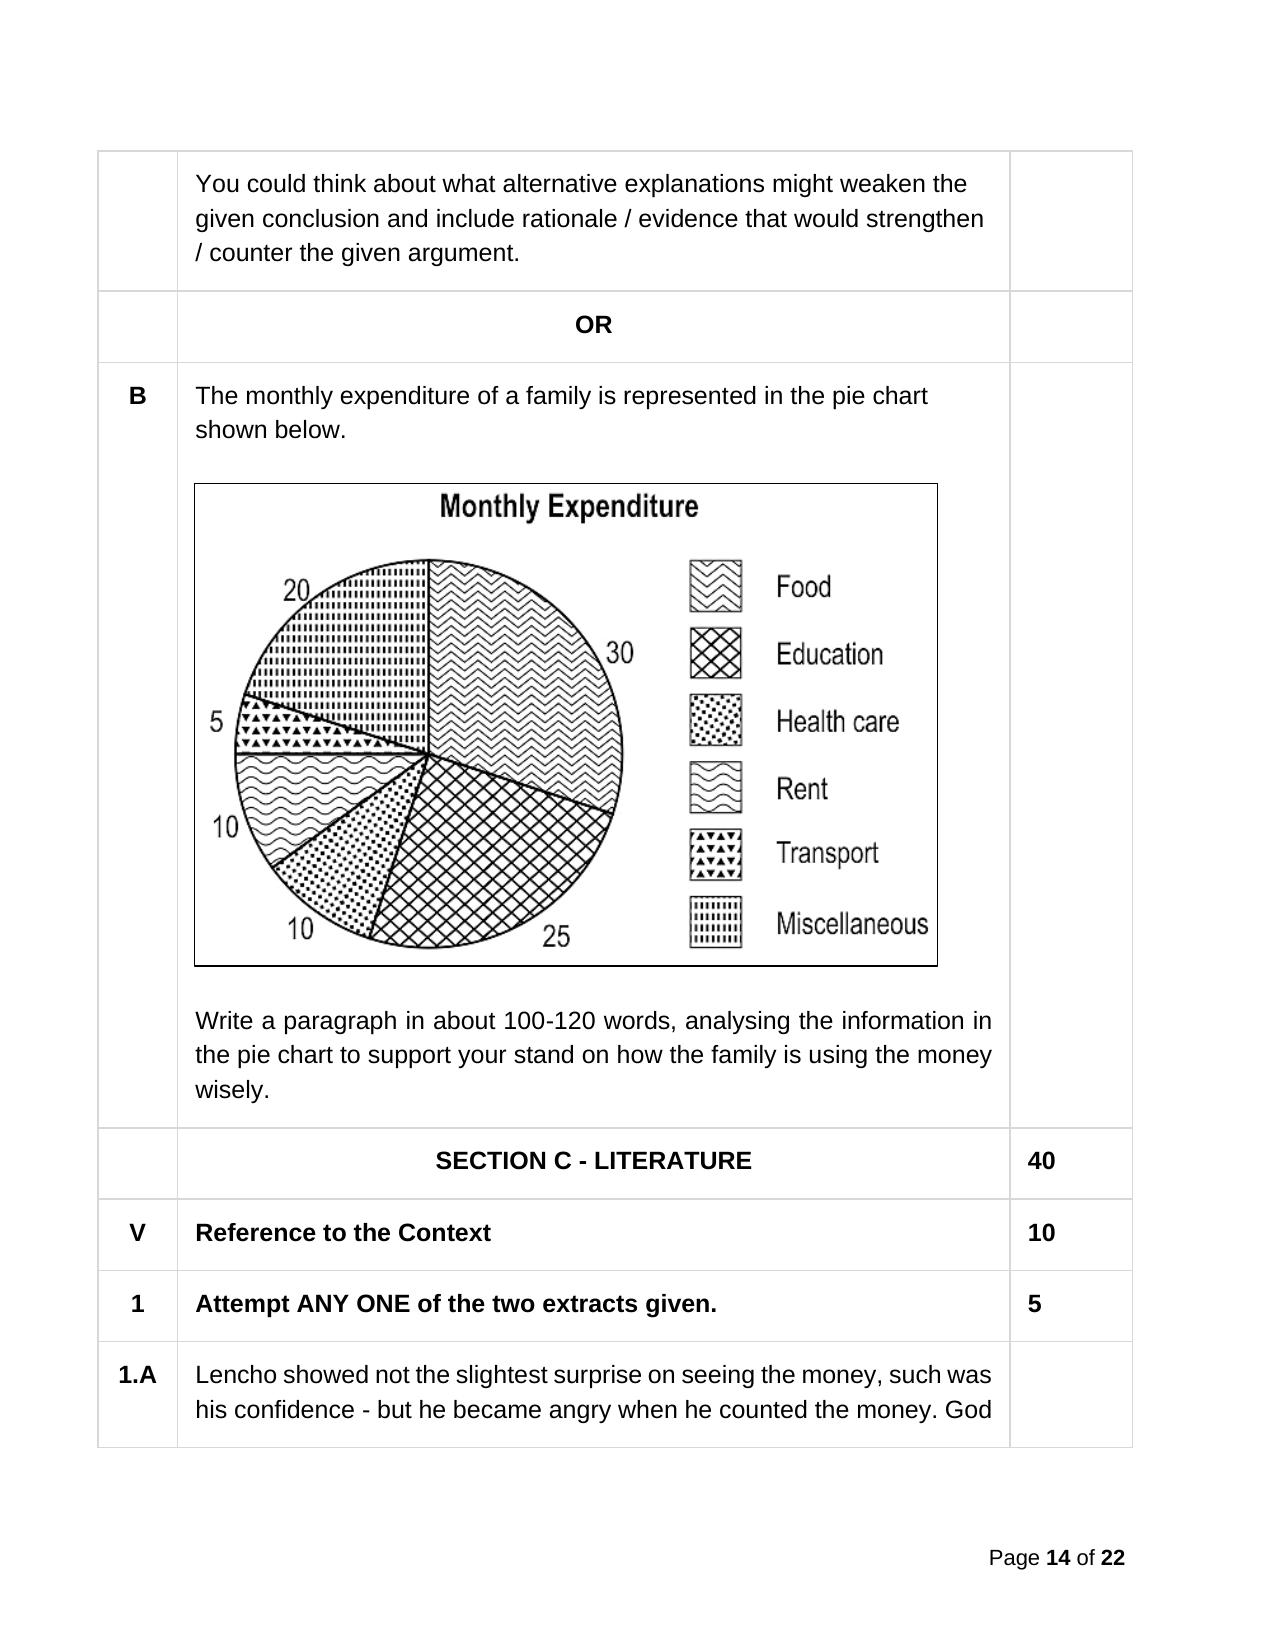 CBSE Class 10 English Practice Questions 2022-23 - Page 14